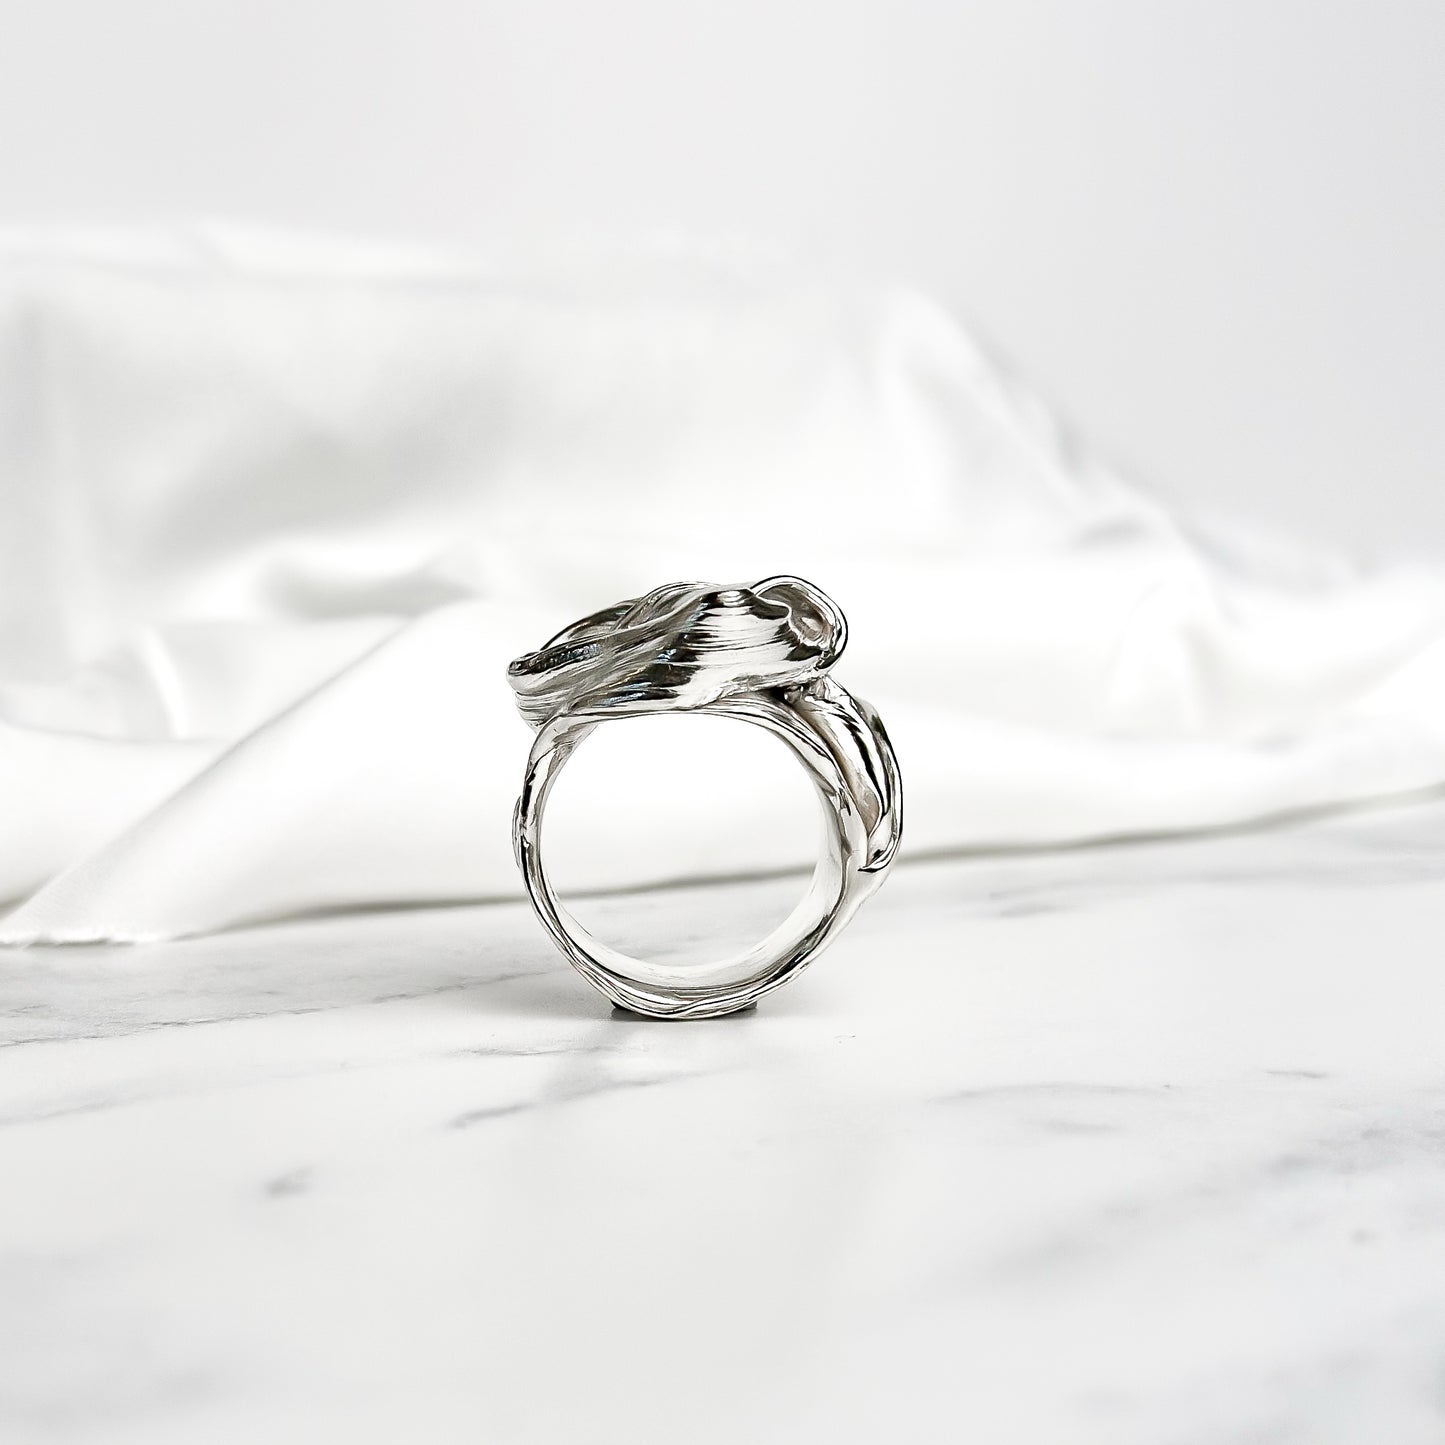 One of a Kind Drift Sterling Silver Ring - Size S